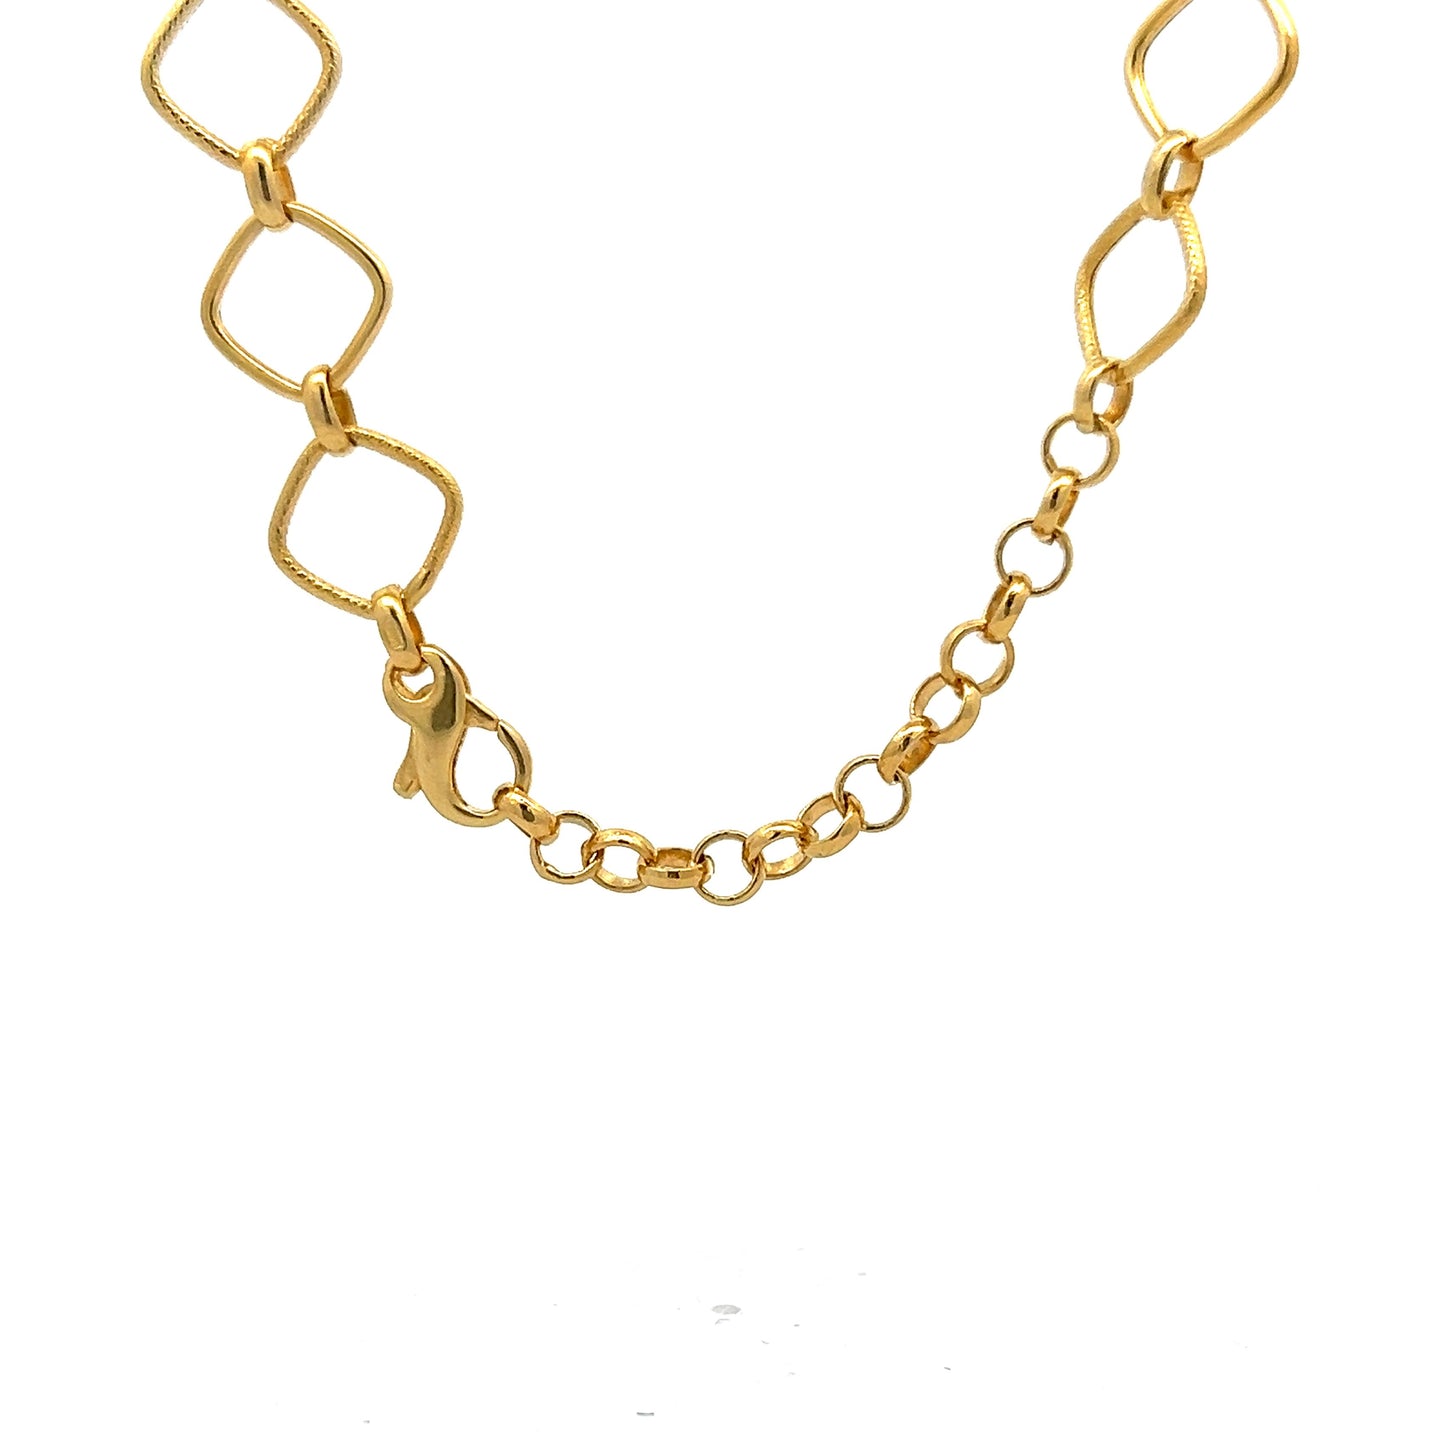 Minimalist Choker Chain Necklace in 14k Yellow Gold